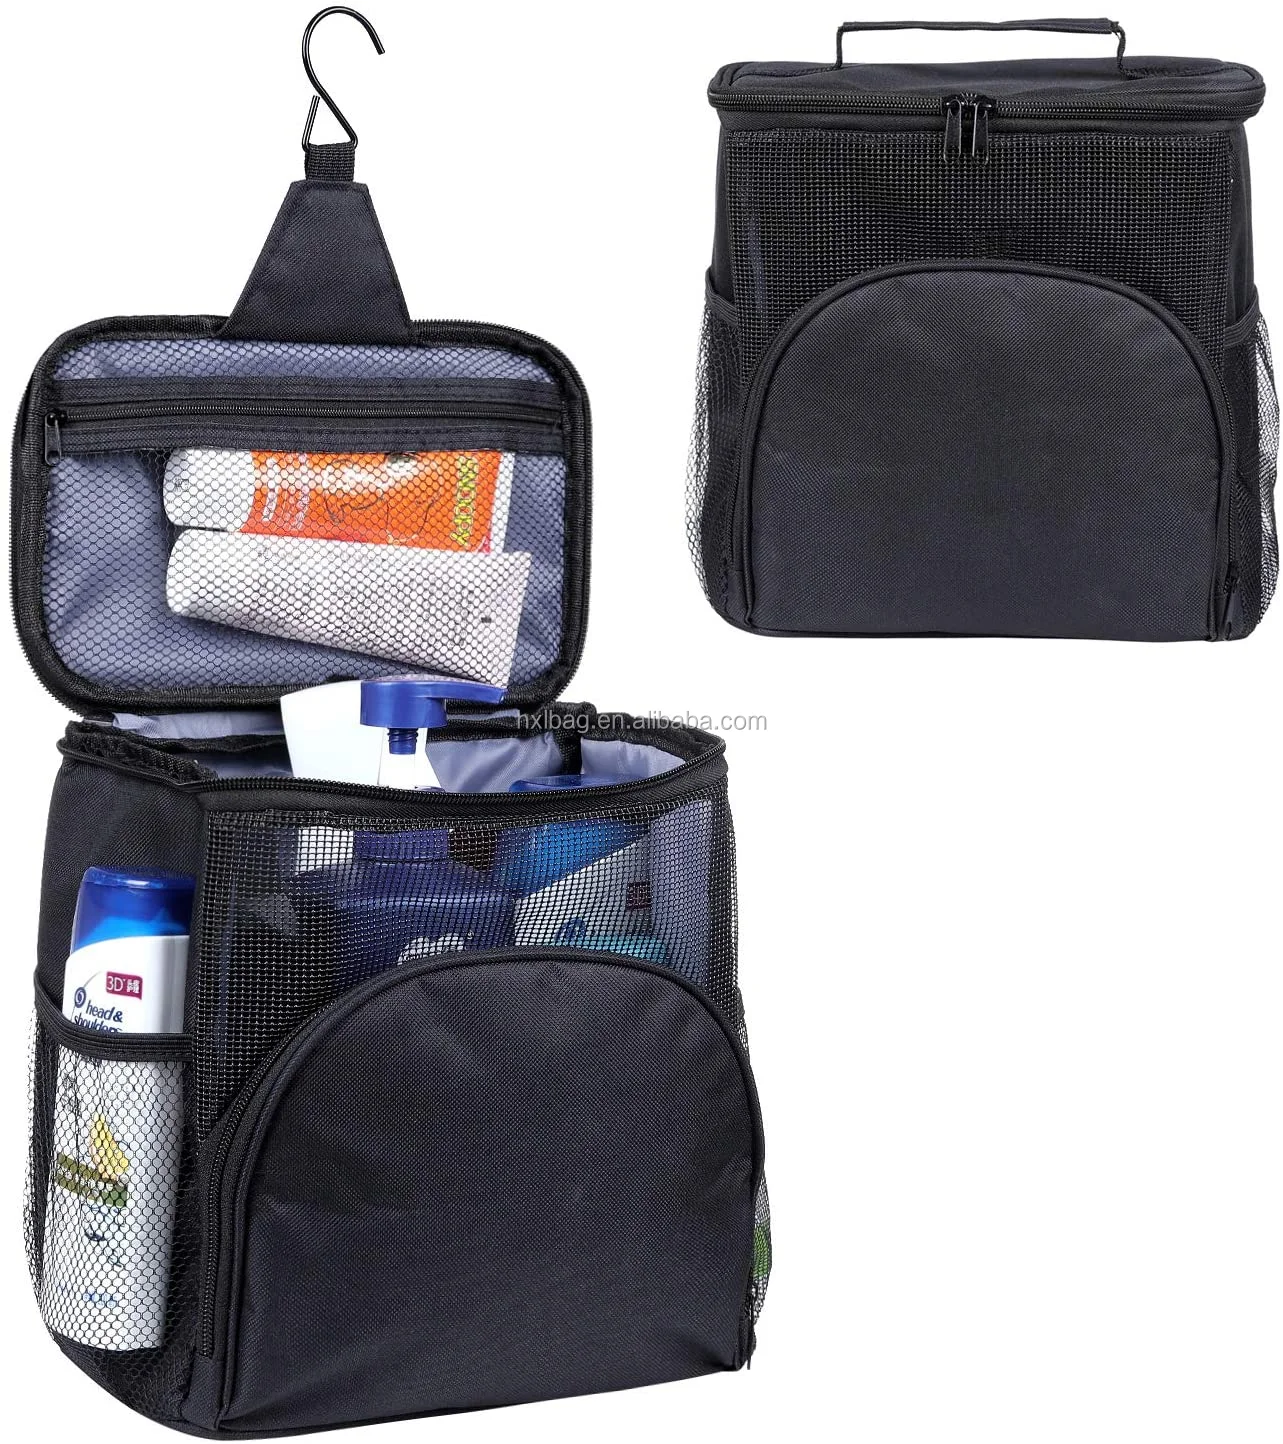 Details about   KUSOOFA Shower Caddy Tote Bag Mesh Shower BagHanging Toiletry Bag with Quick ... 